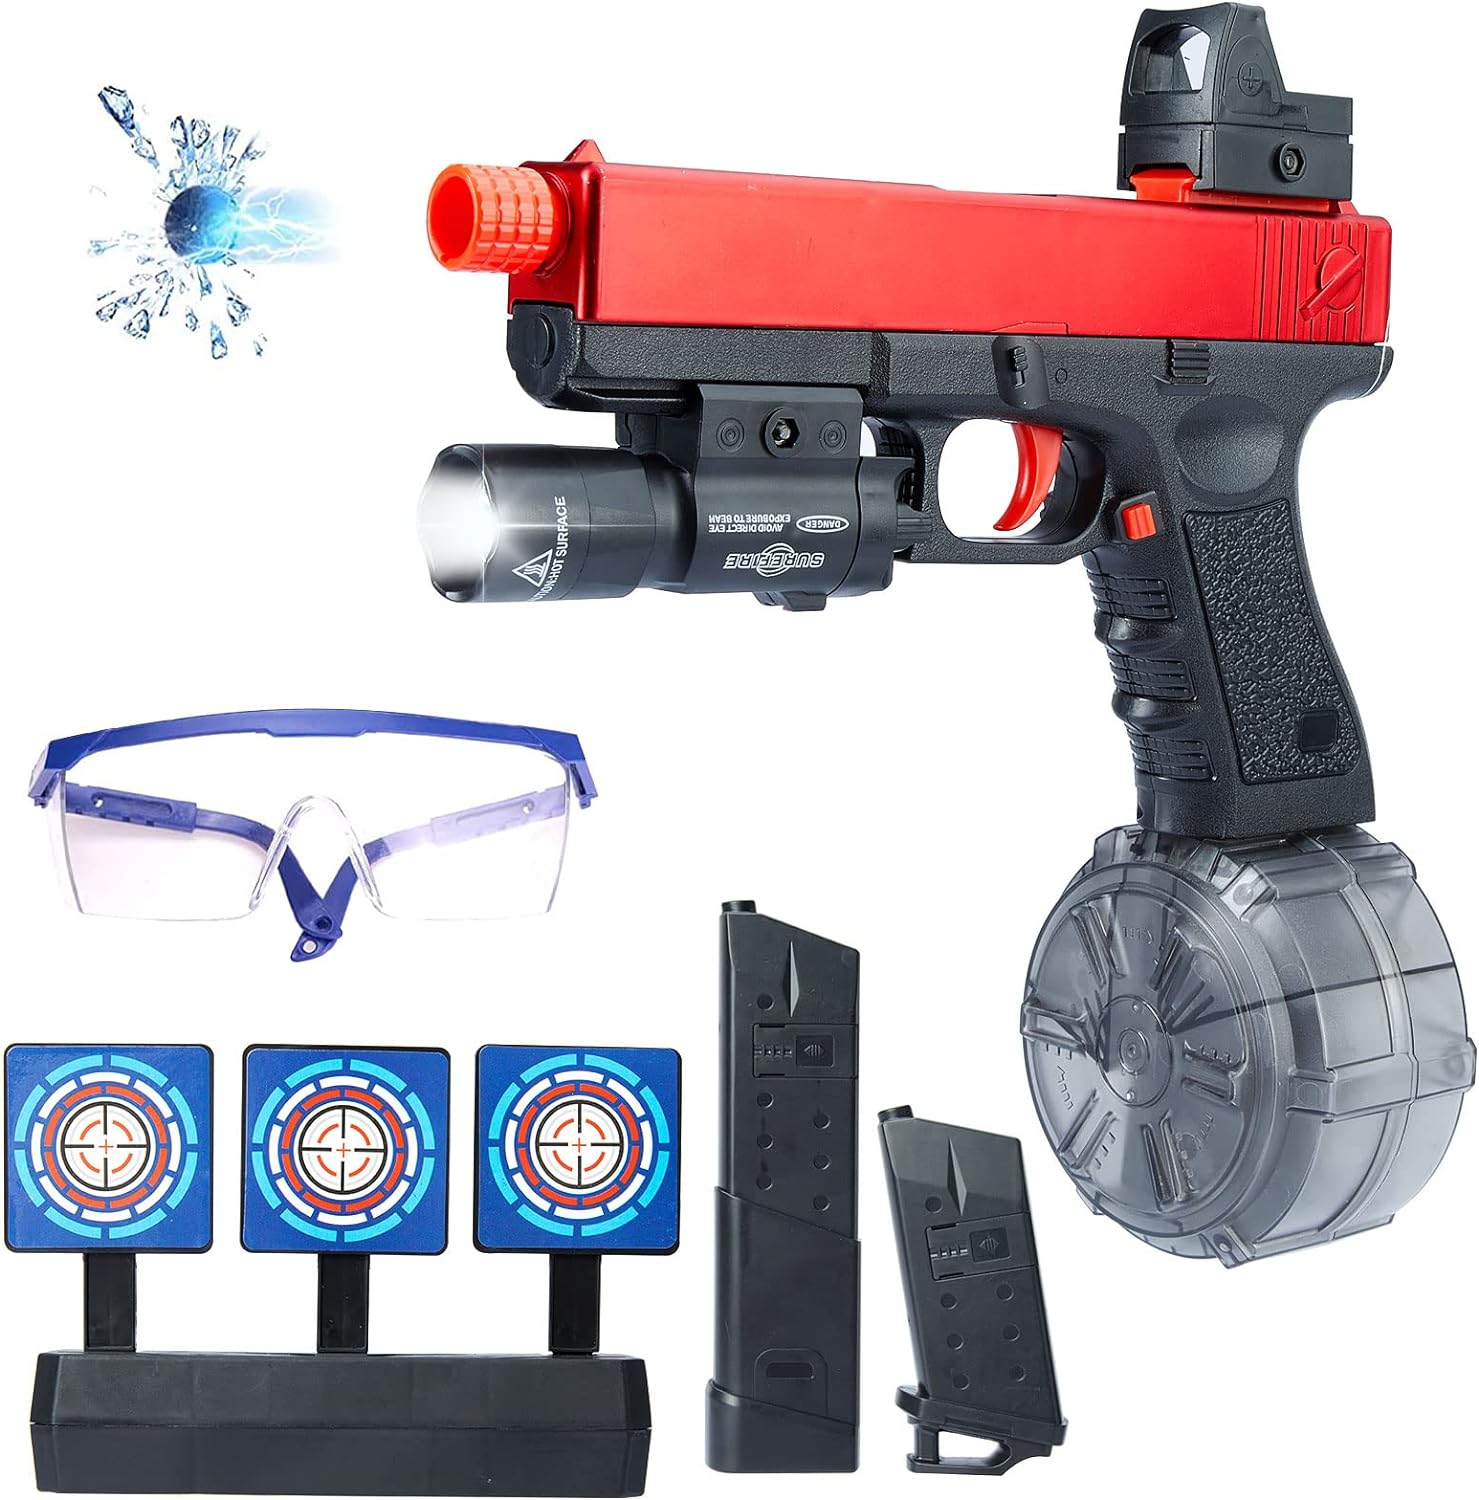 An Electric Orbeez Gel Blaster with a light and other accessories.